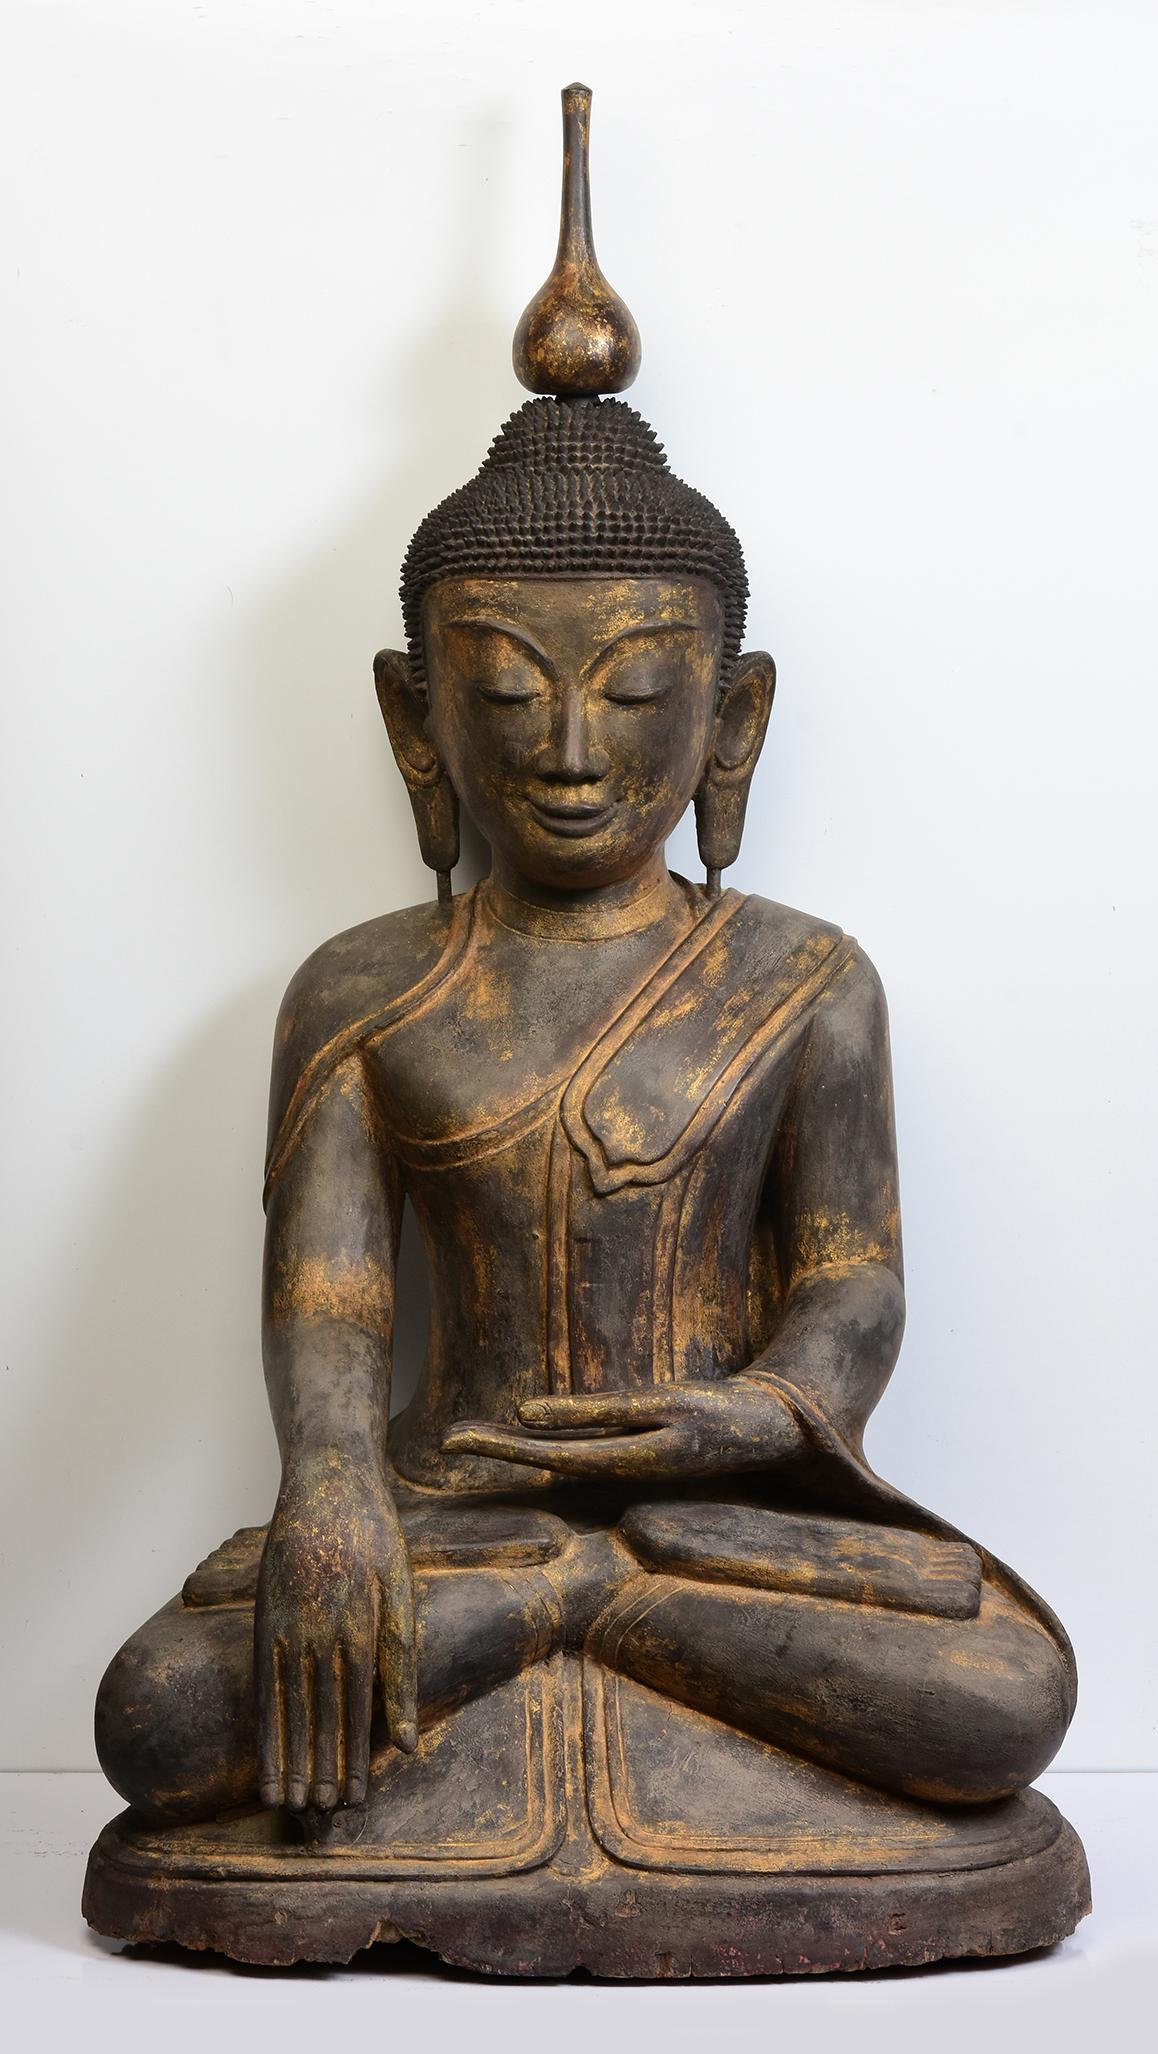 Antique large Burmese wooden Buddha sitting in Mara Vijaya (calling the earth to witness) posture on a base.

Age: Burma, Early Shan Period, Early 16th Century
Size: Height 123.8 C.M. / Width 69.5 C.M. / Depth 49 C.M.
Condition: Nice condition